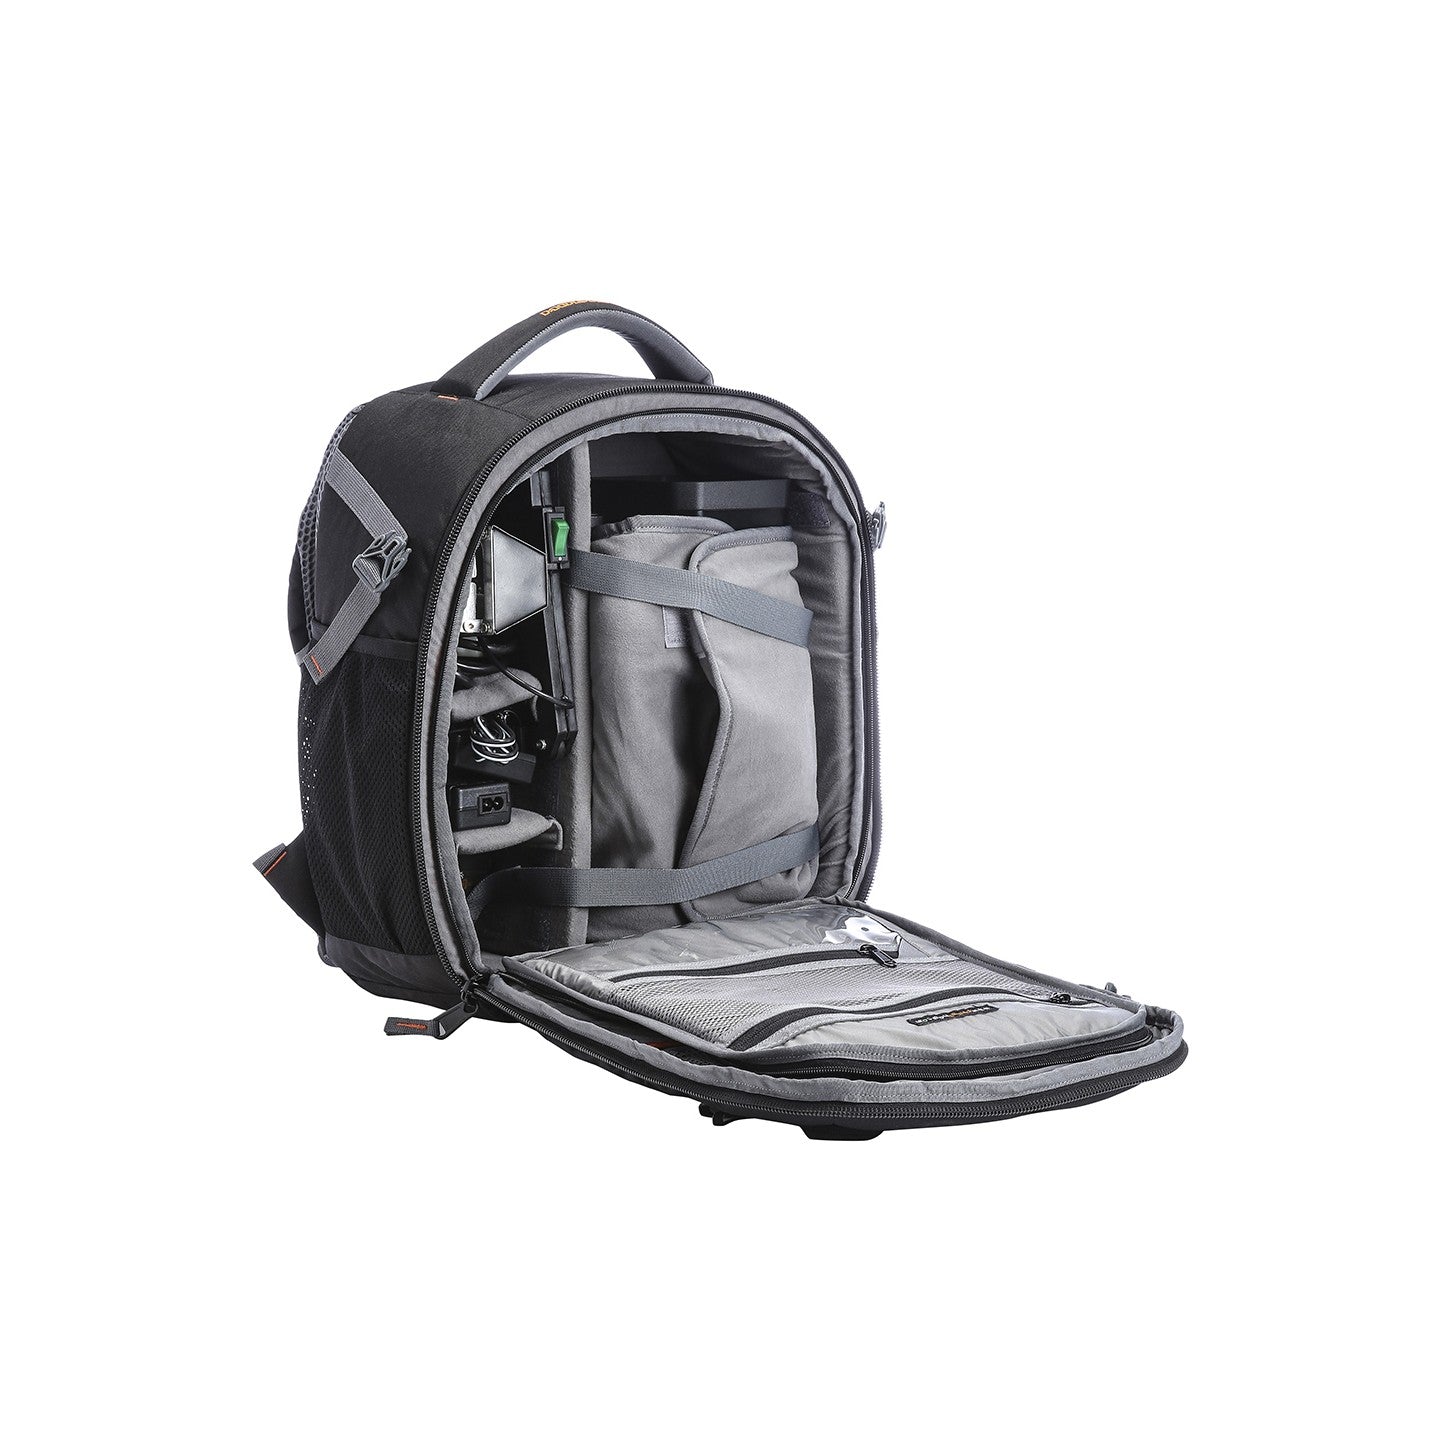 Image: Front view of the open P36 Torino 1 video camera backpack, showcasing its spacious interior with a camera and various equipment neatly organized inside. The bag's dedicated compartments and customizable dividers provide secure and convenient storage for video cameras, lenses, accessories, and more. Stay organized and ready to capture professional-quality footage with the P36 Torino 1.